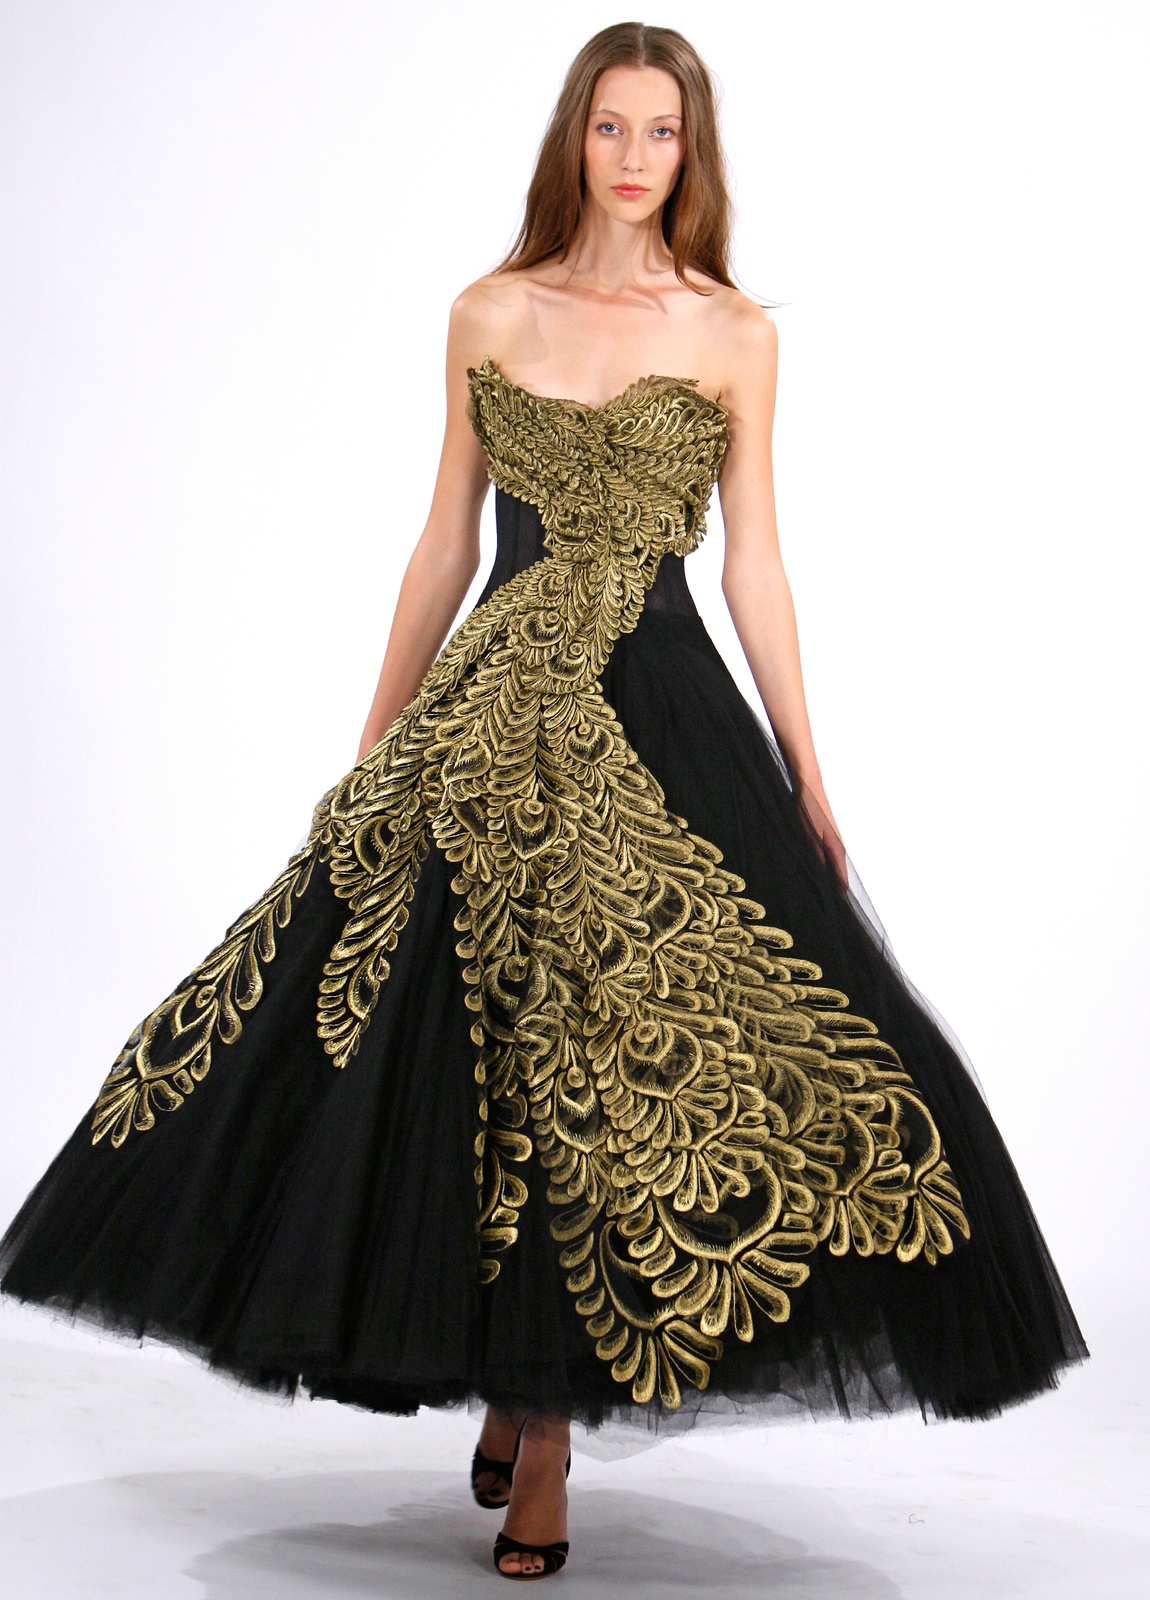 An Enchanting Evening Gown by Marchesa for Tinker Tailor | Crazy Rich ...